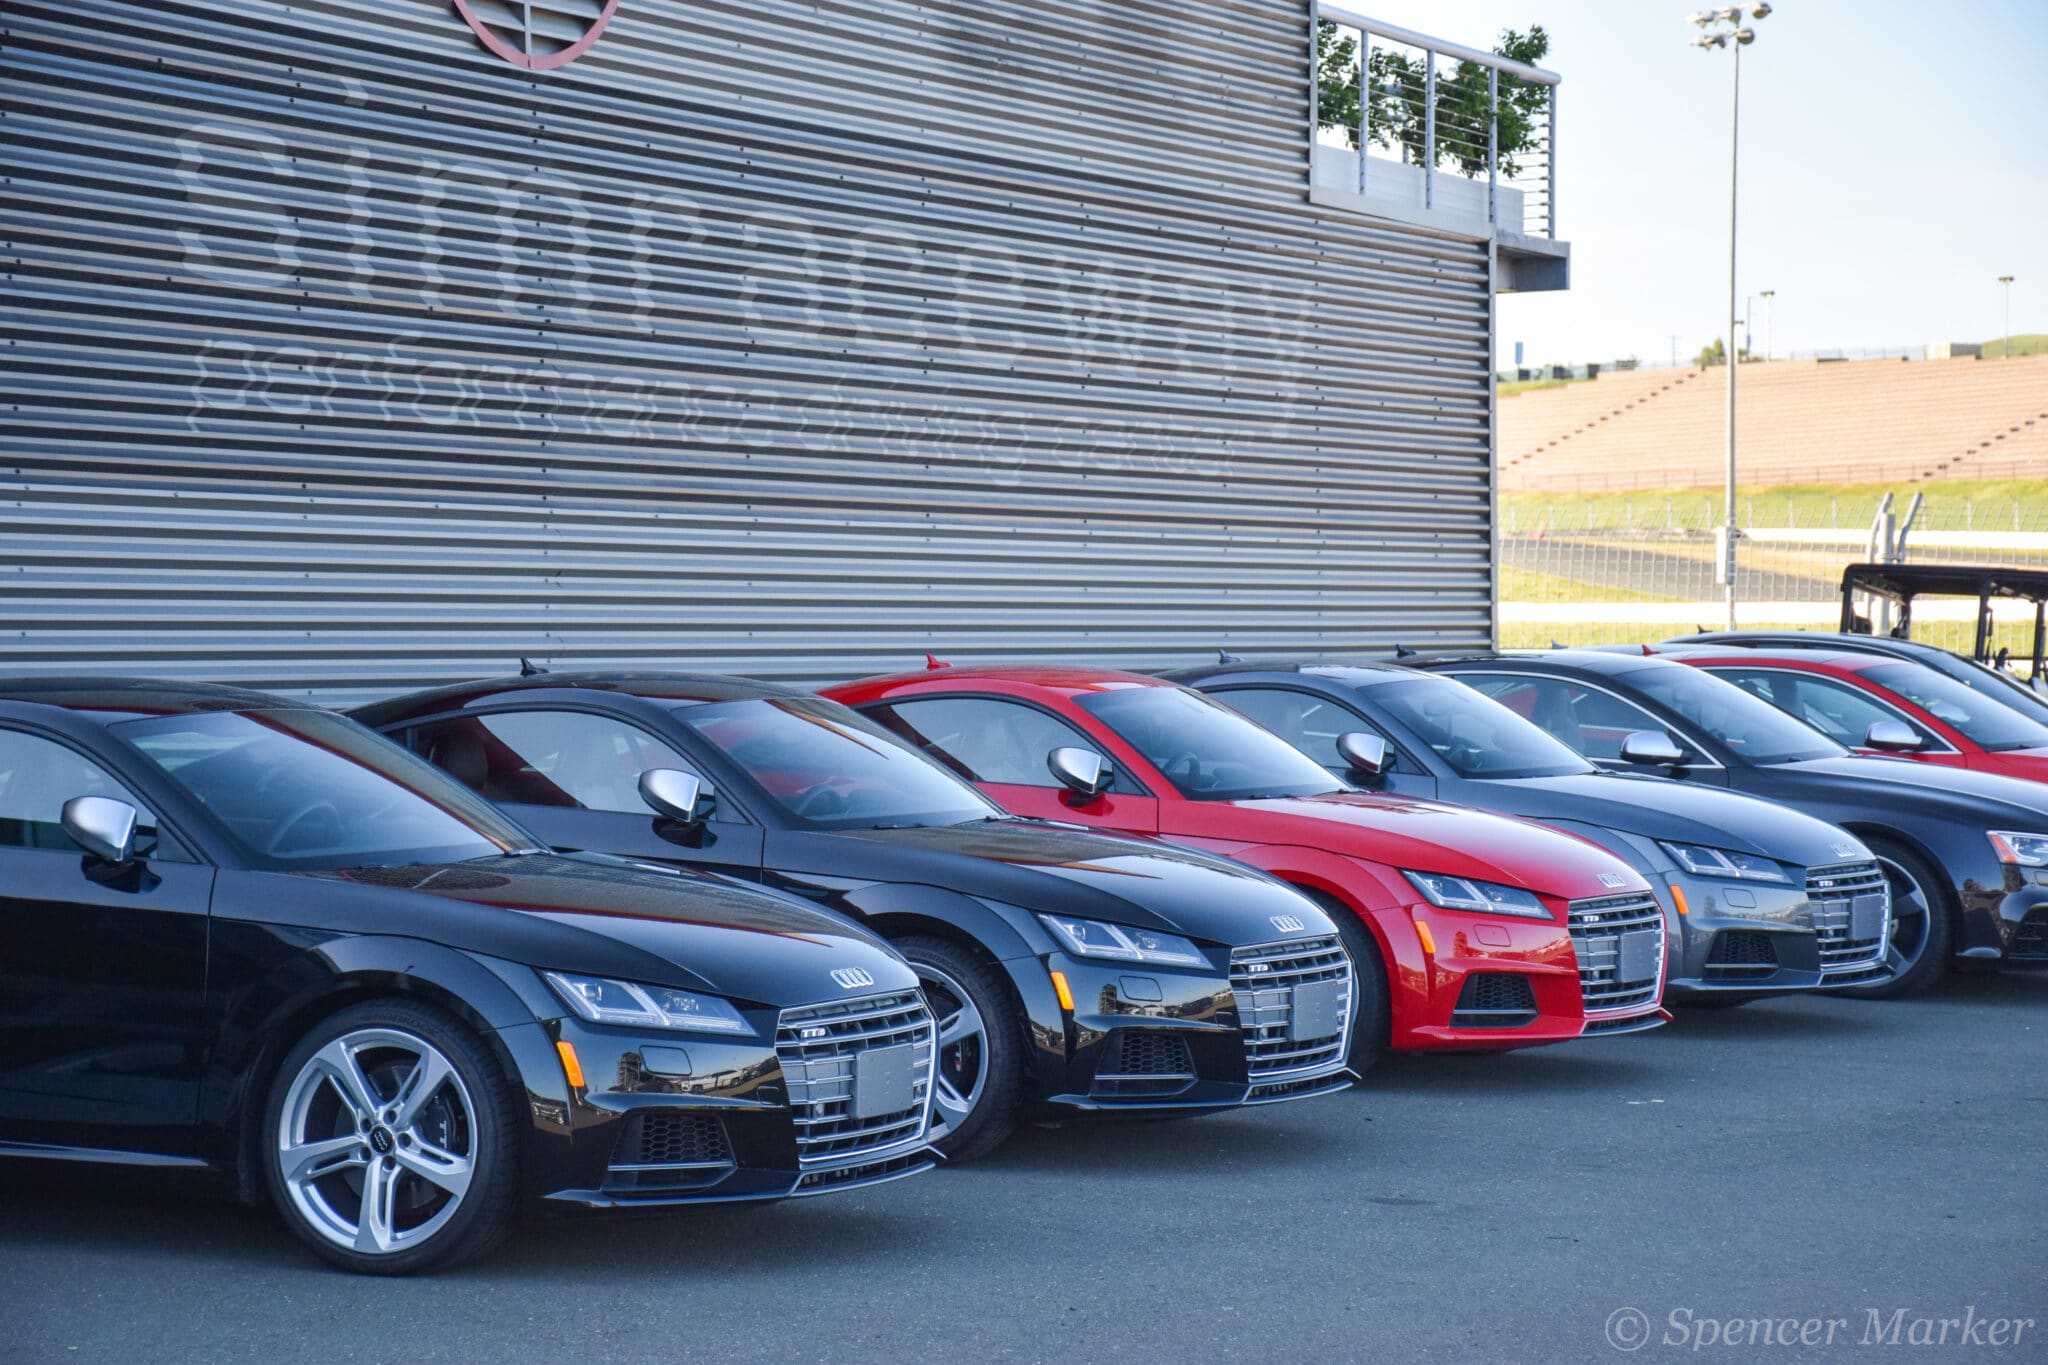 The lineup of Audi performance cars